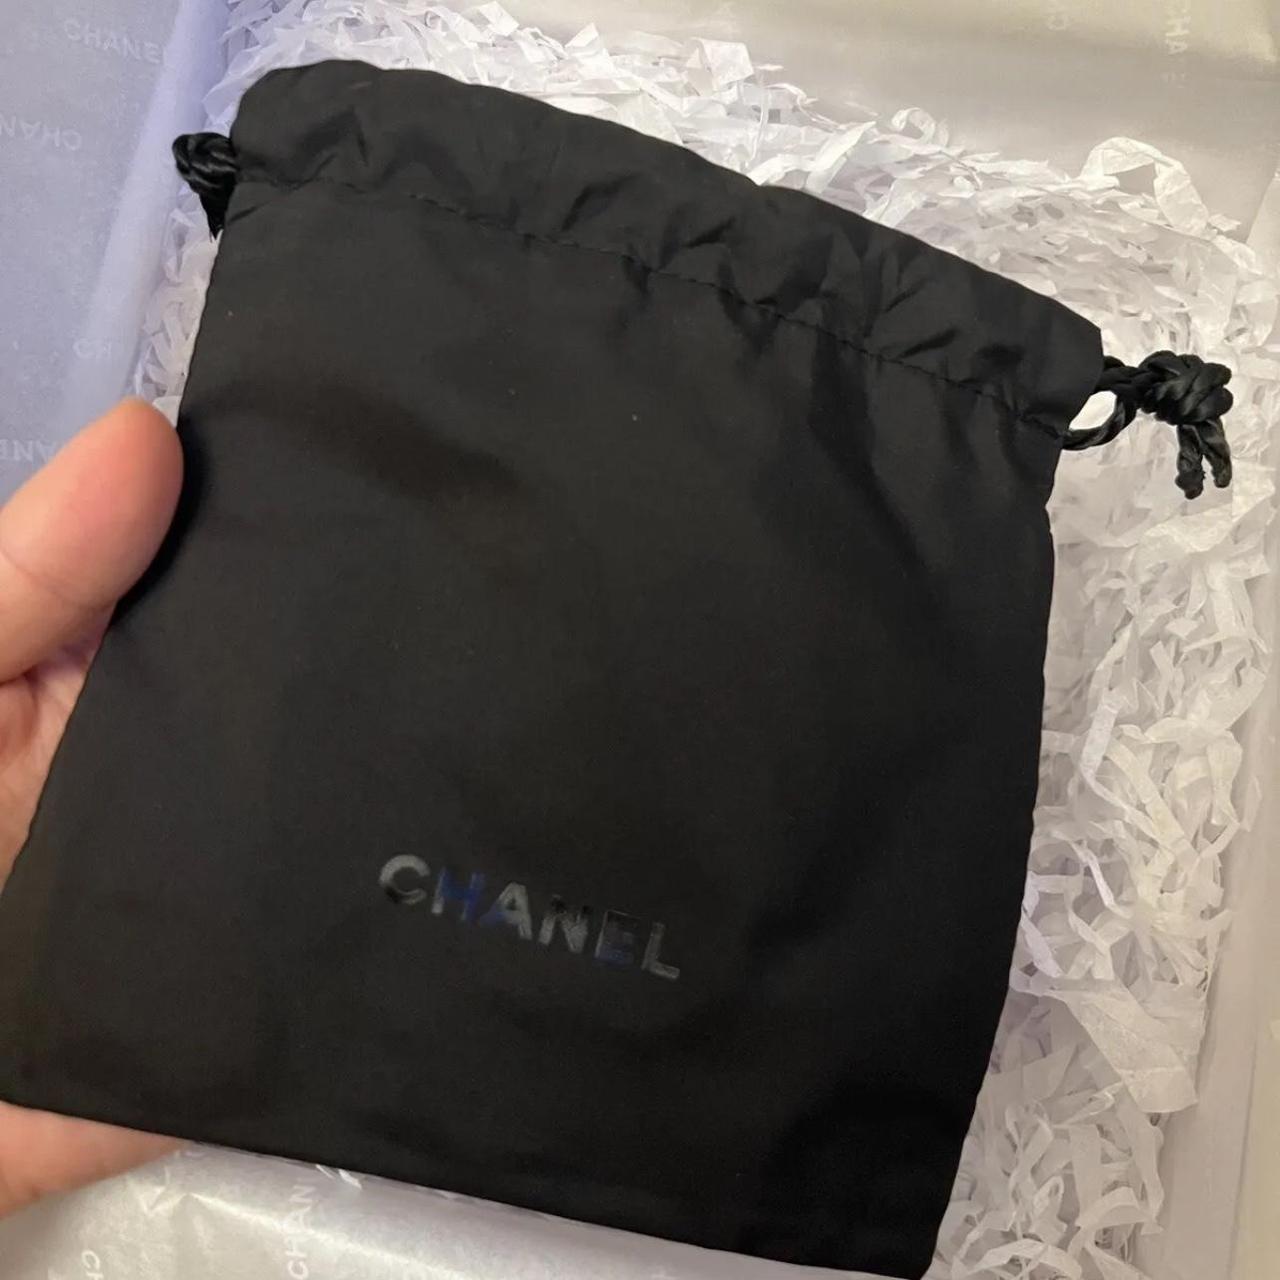 NEW AUTHENTIC Small Chanel Dust Bag 5 x 5.5